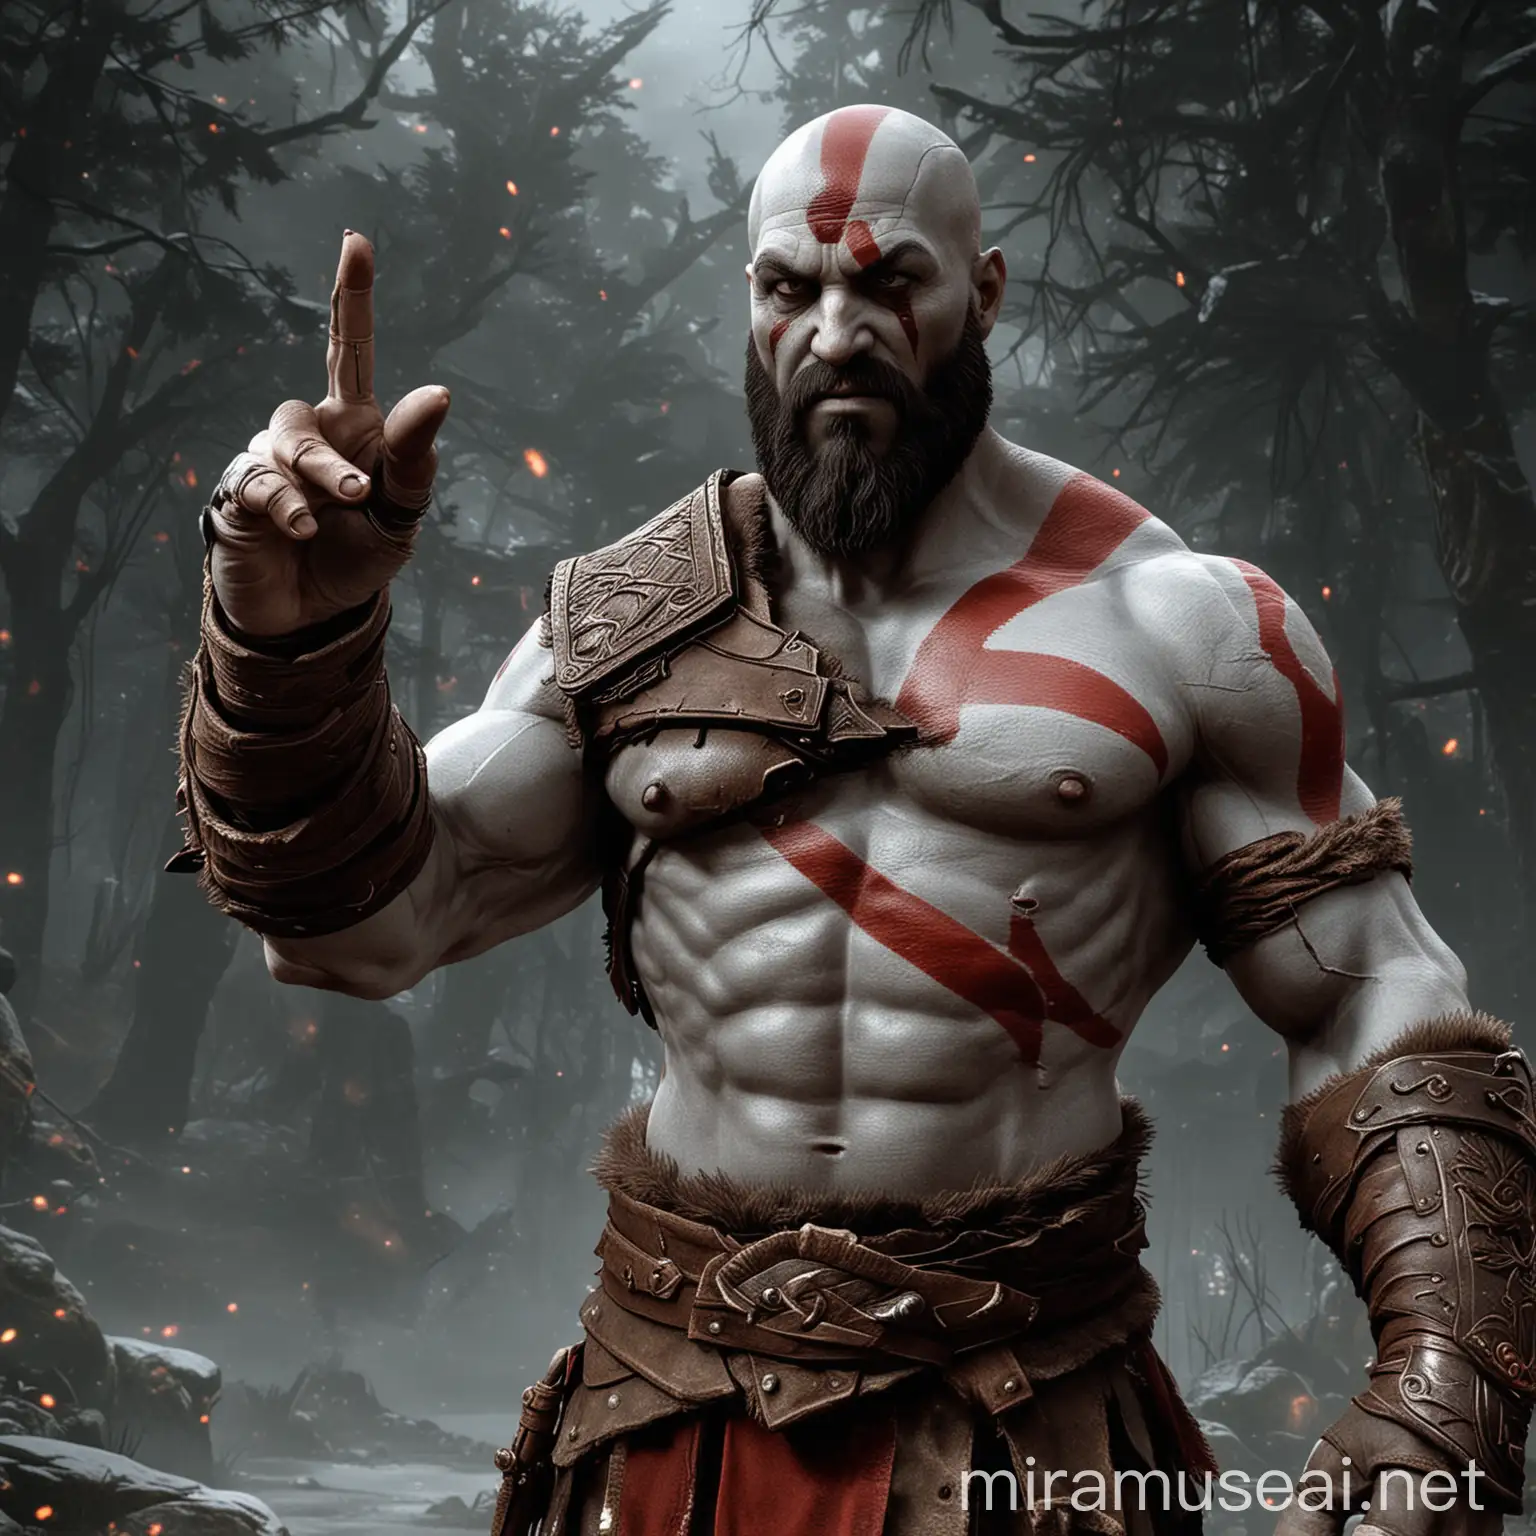 Kratos from God of War pointing just one of his index finger to me